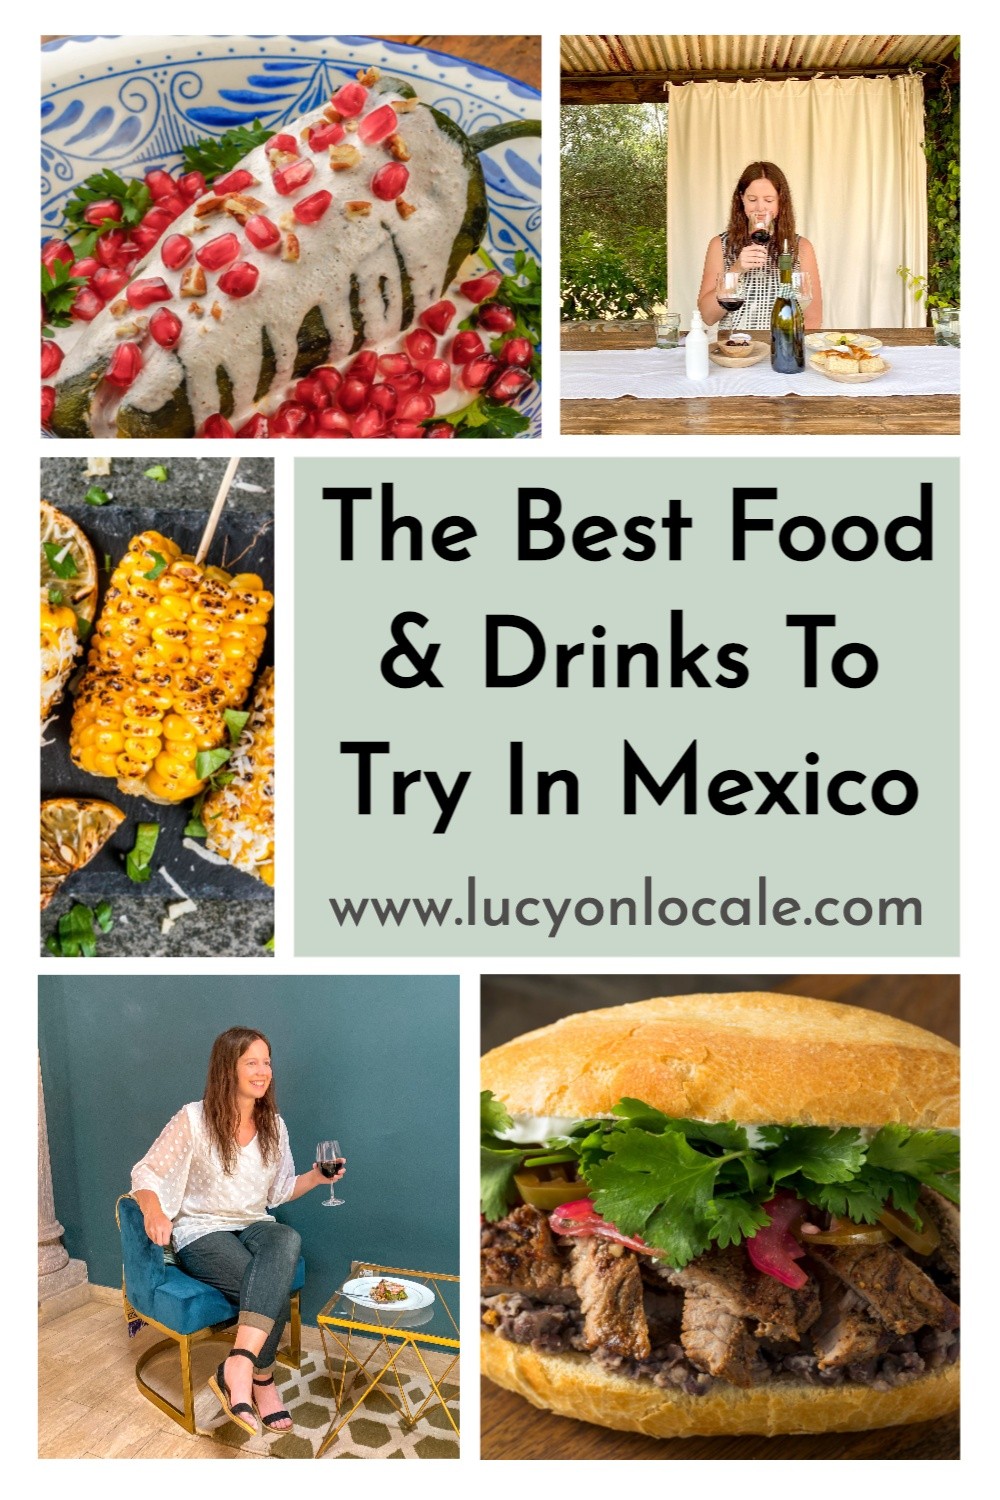 The best foods to try in Mexico